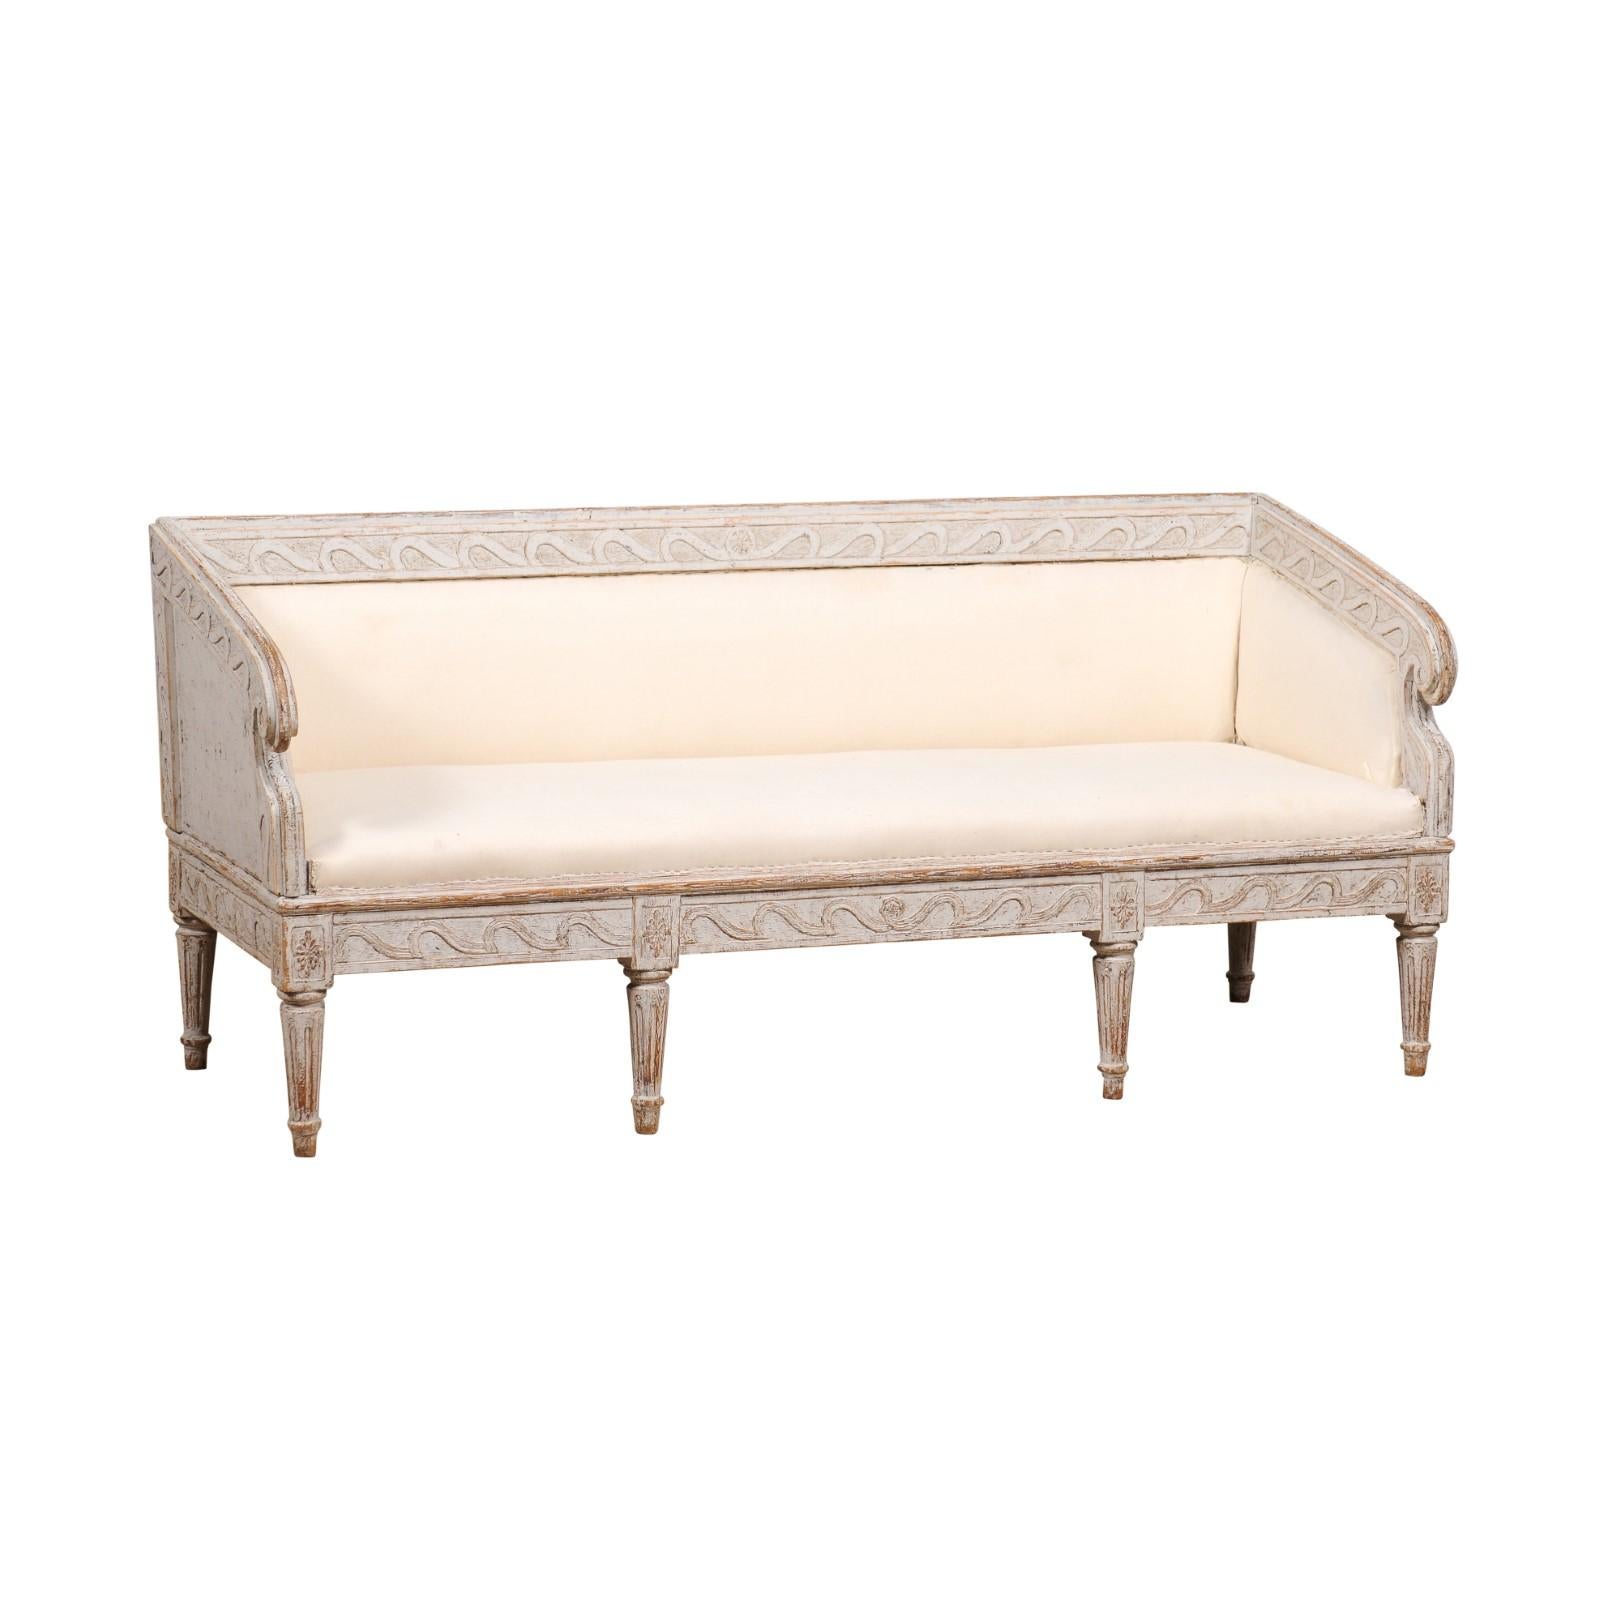 A Swedish Gustavian period sofa from circa 1780 with carved Vitruvian scroll inspired friezes, rosettes, fluted legs and classic light gray painted finish. A breathtaking embodiment of Swedish Gustavian elegance, this circa 1780 sofa is a veritable